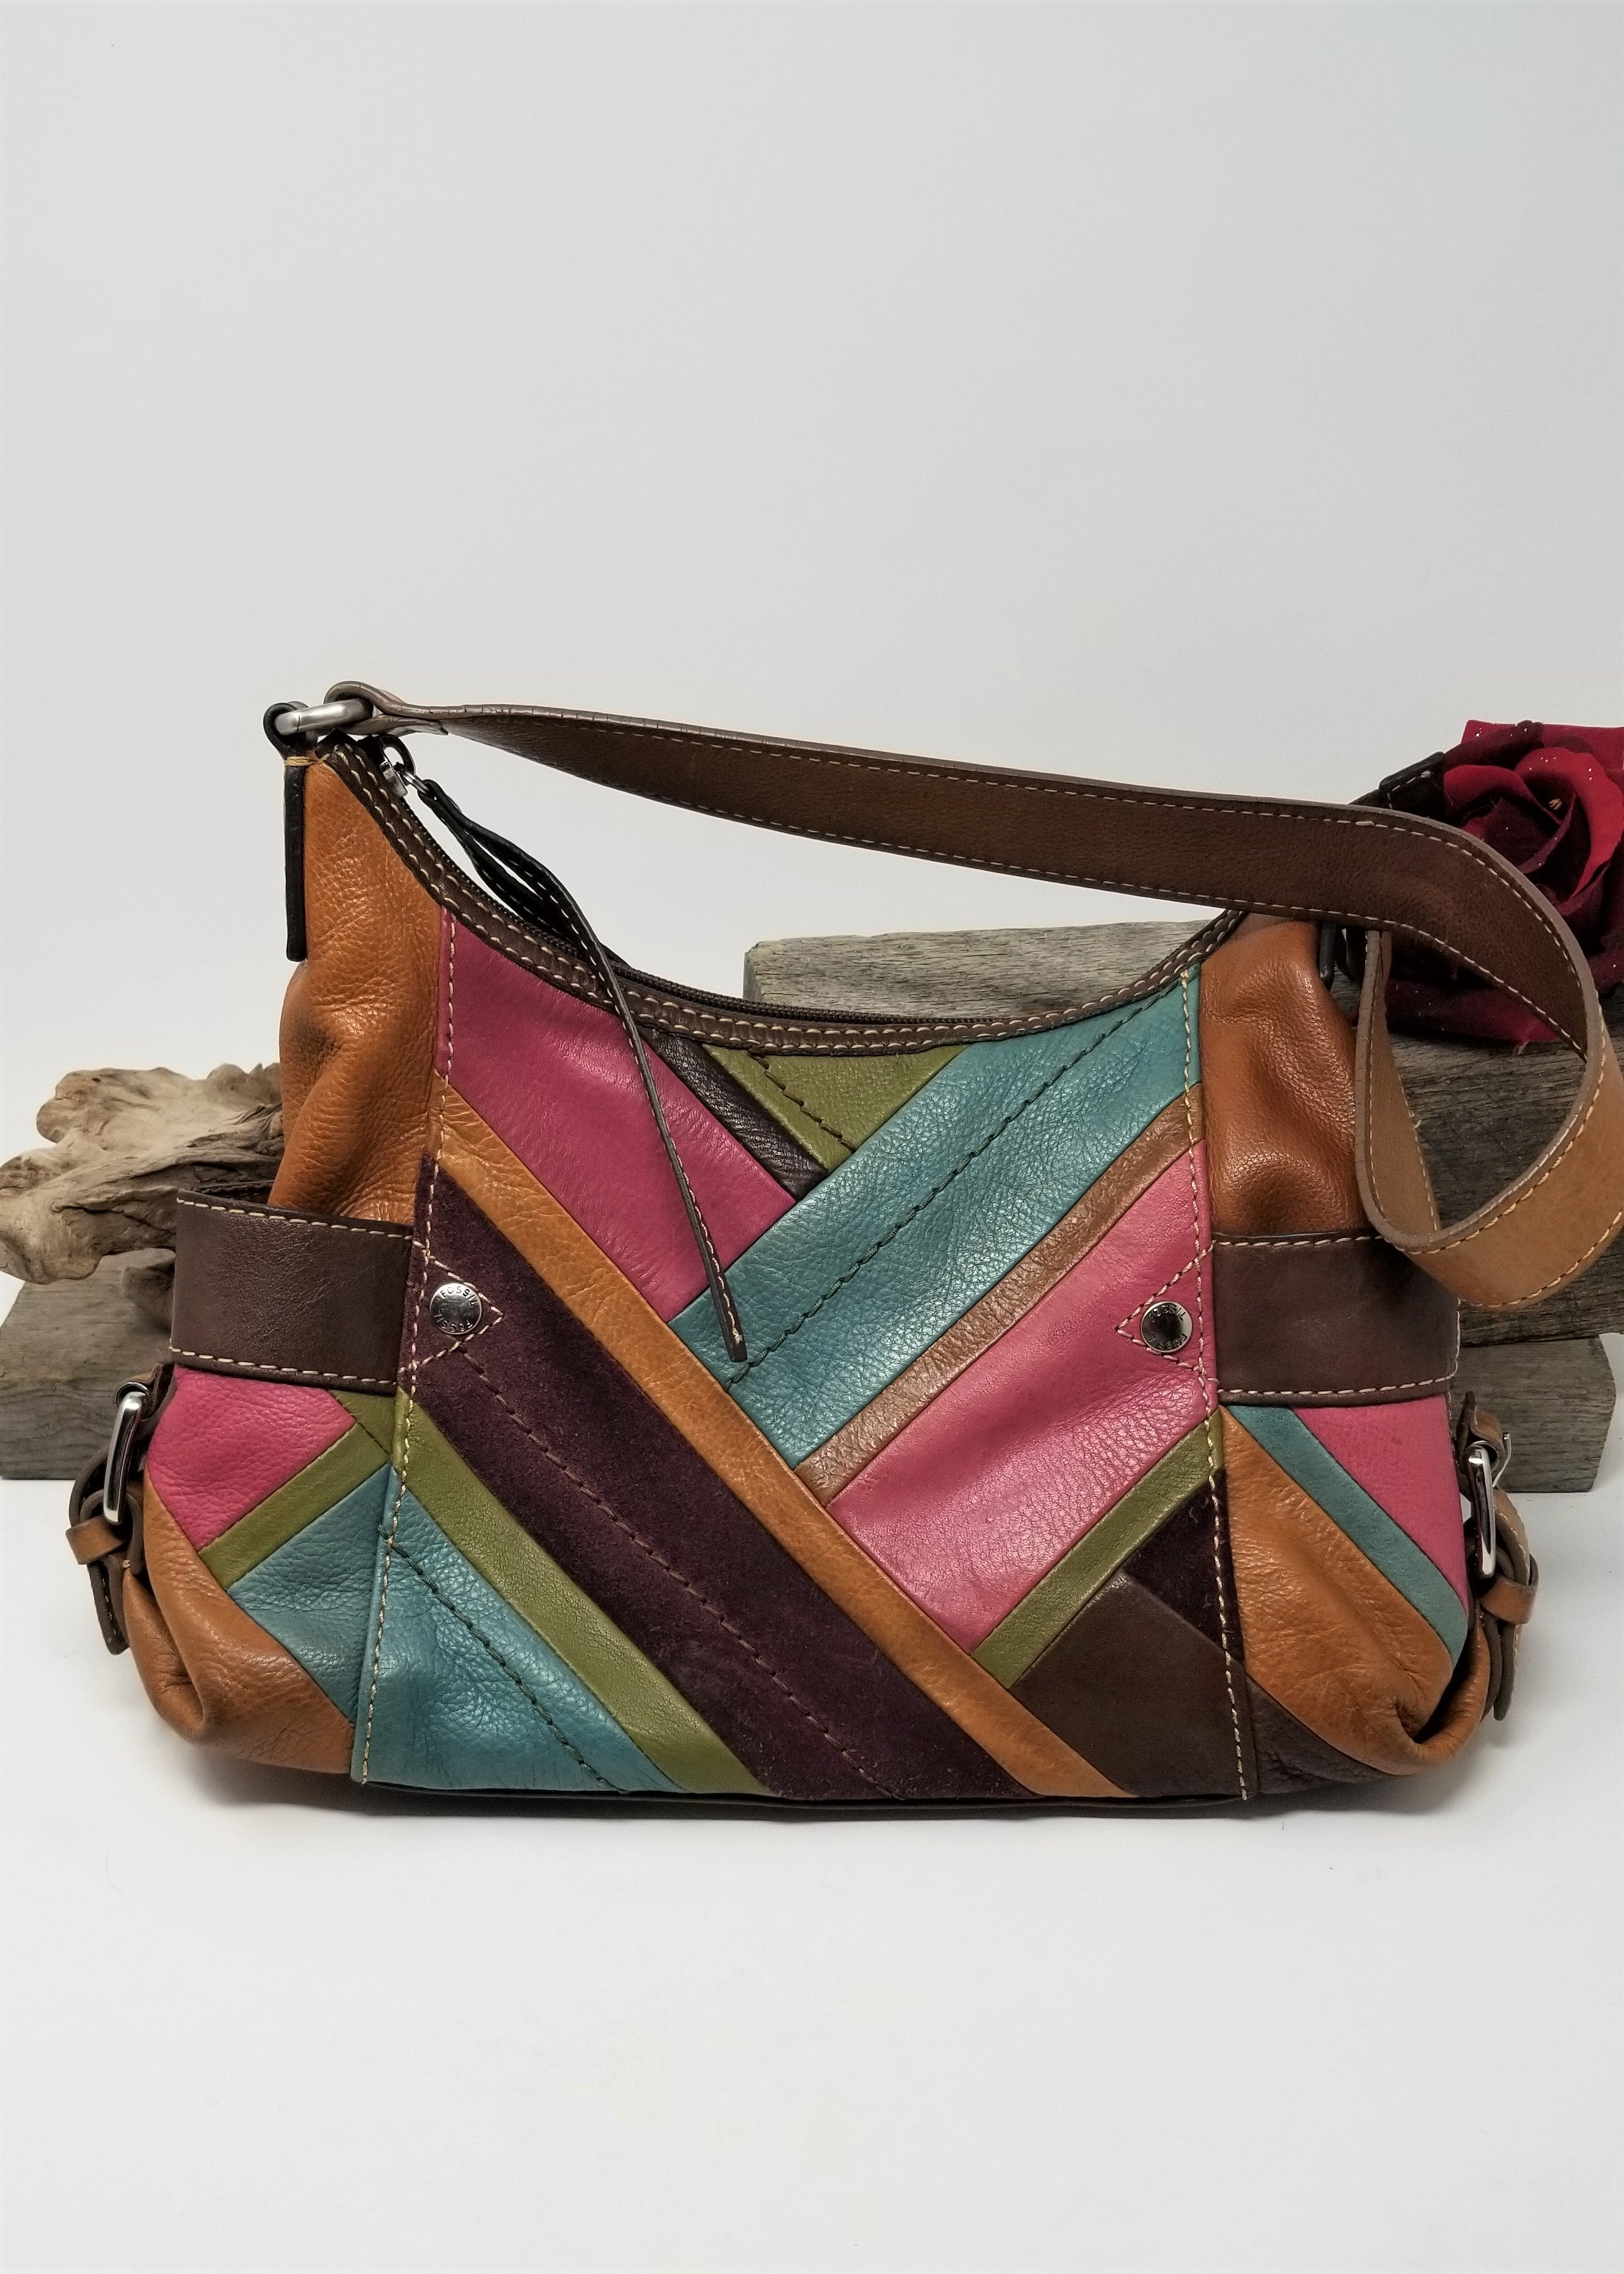 Fossil Leather Purse of Many Colors Shoulder Bag